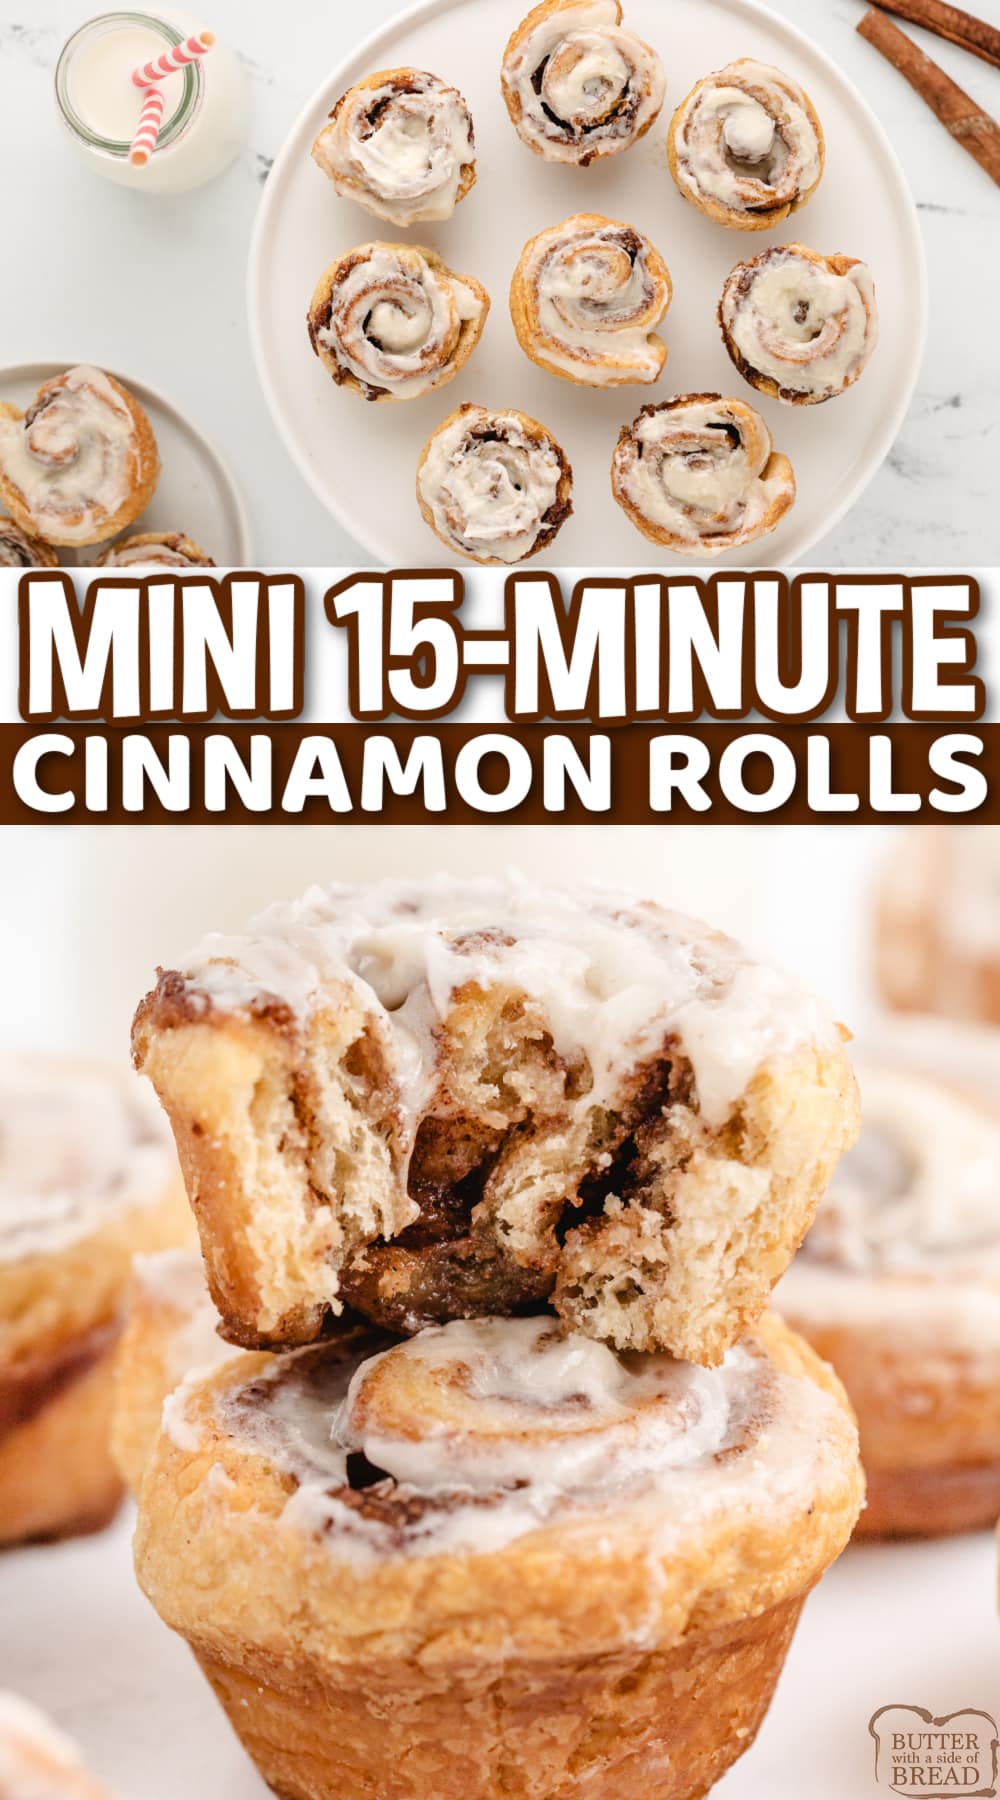 Mini Cinnamon Rolls are so much quicker (and cuter!) than traditional from-scratch cinnamon rolls, and they are delicious too! Cinnamon rolls that are ready in less than 15 minutes!